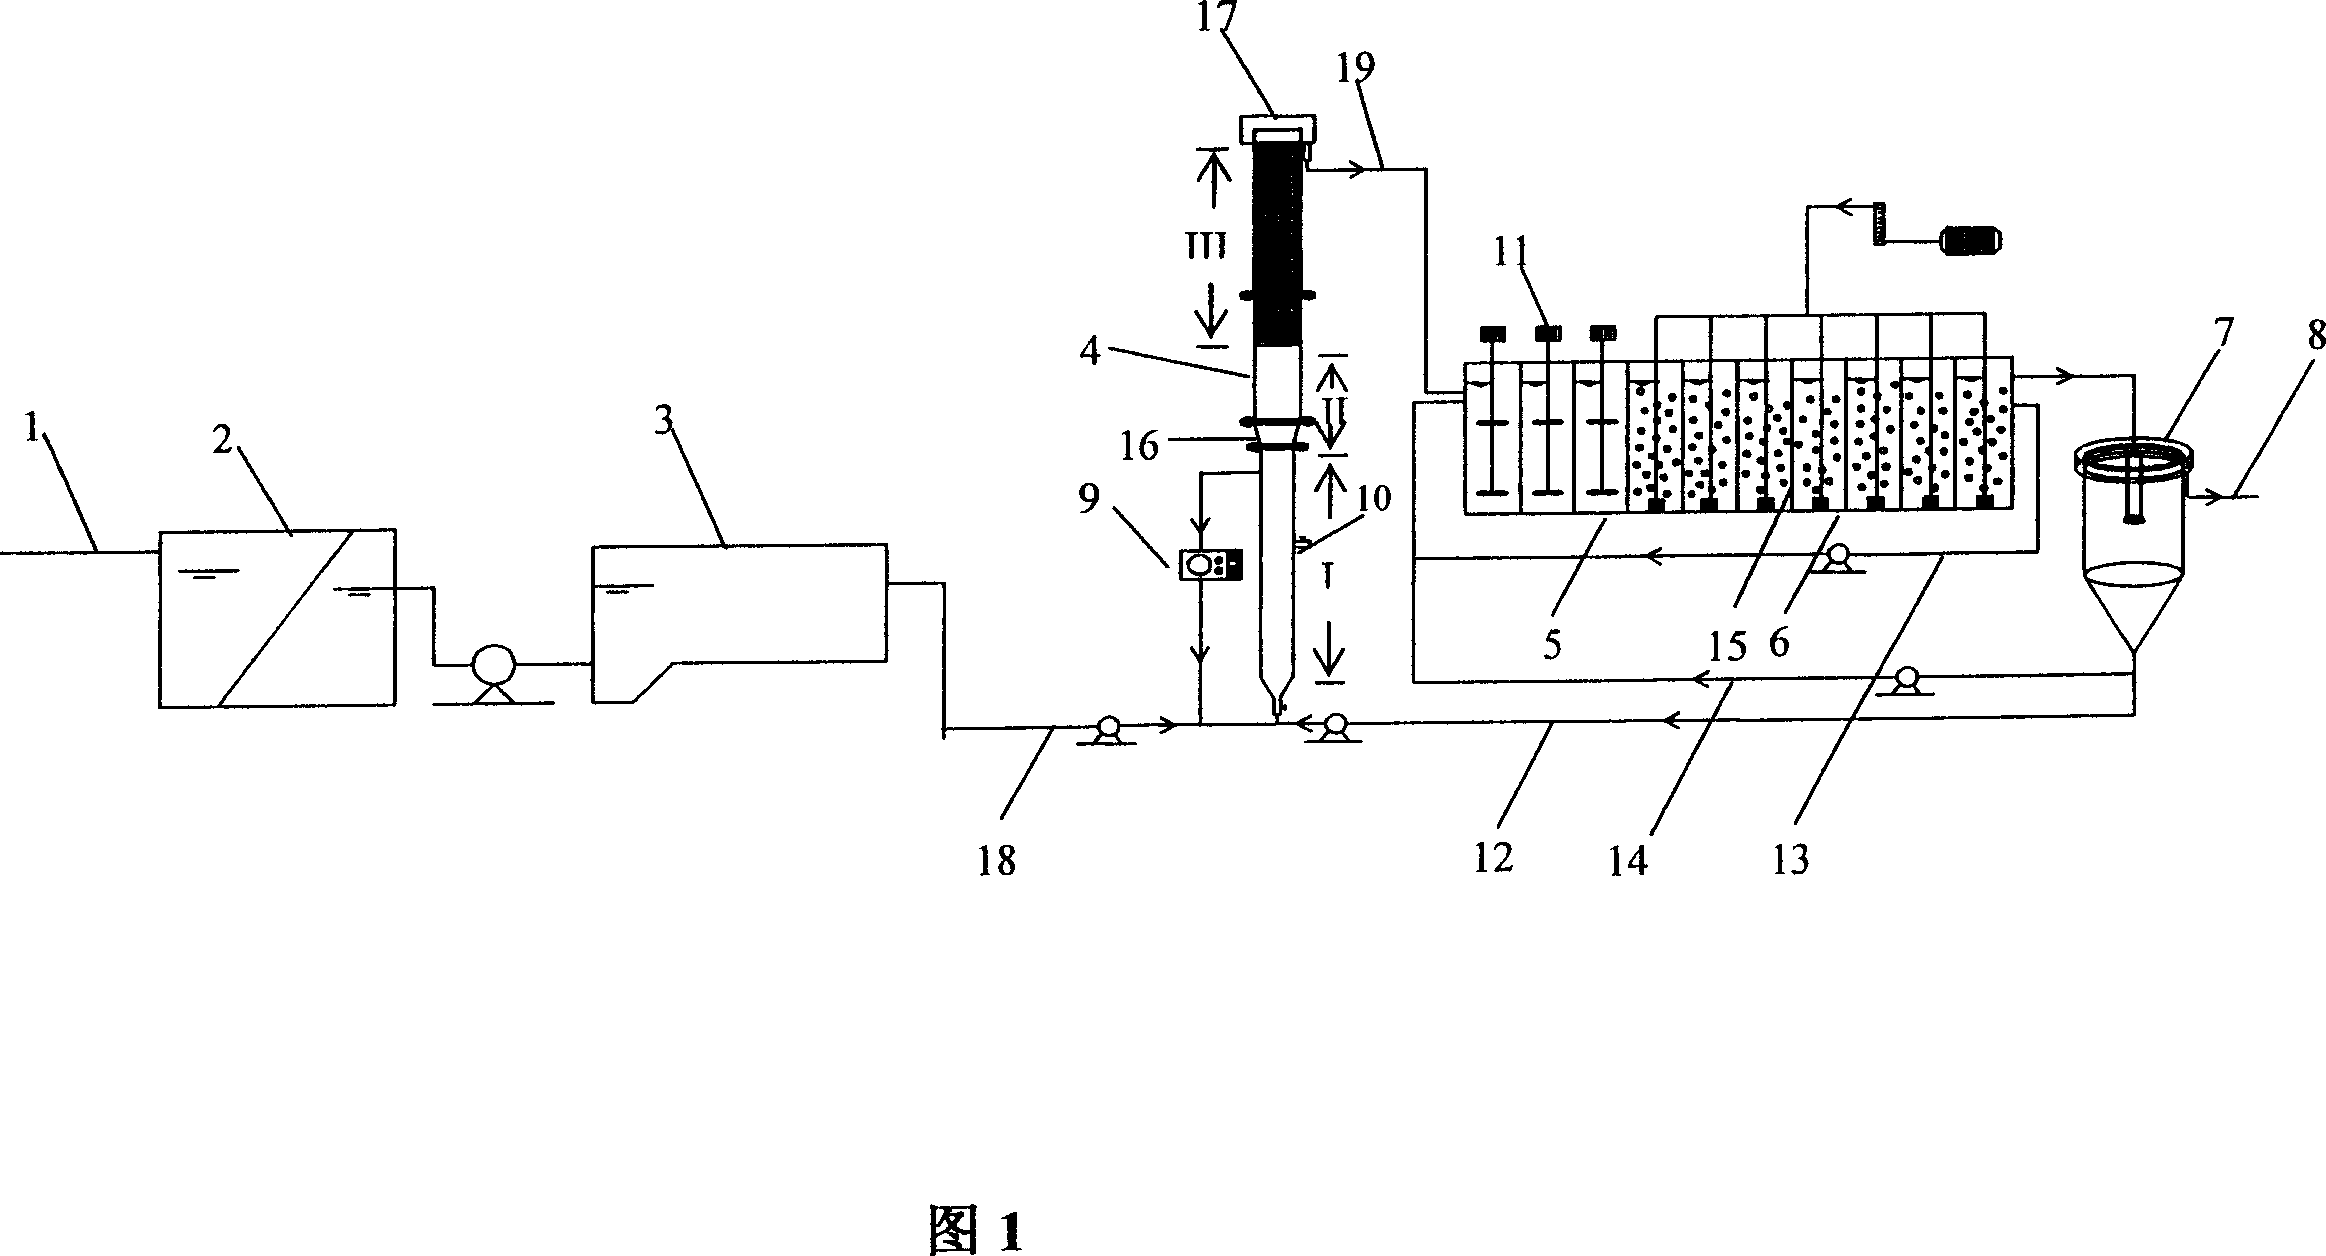 Denitrified biological denitrificaion equipment of intensified internal source, and method